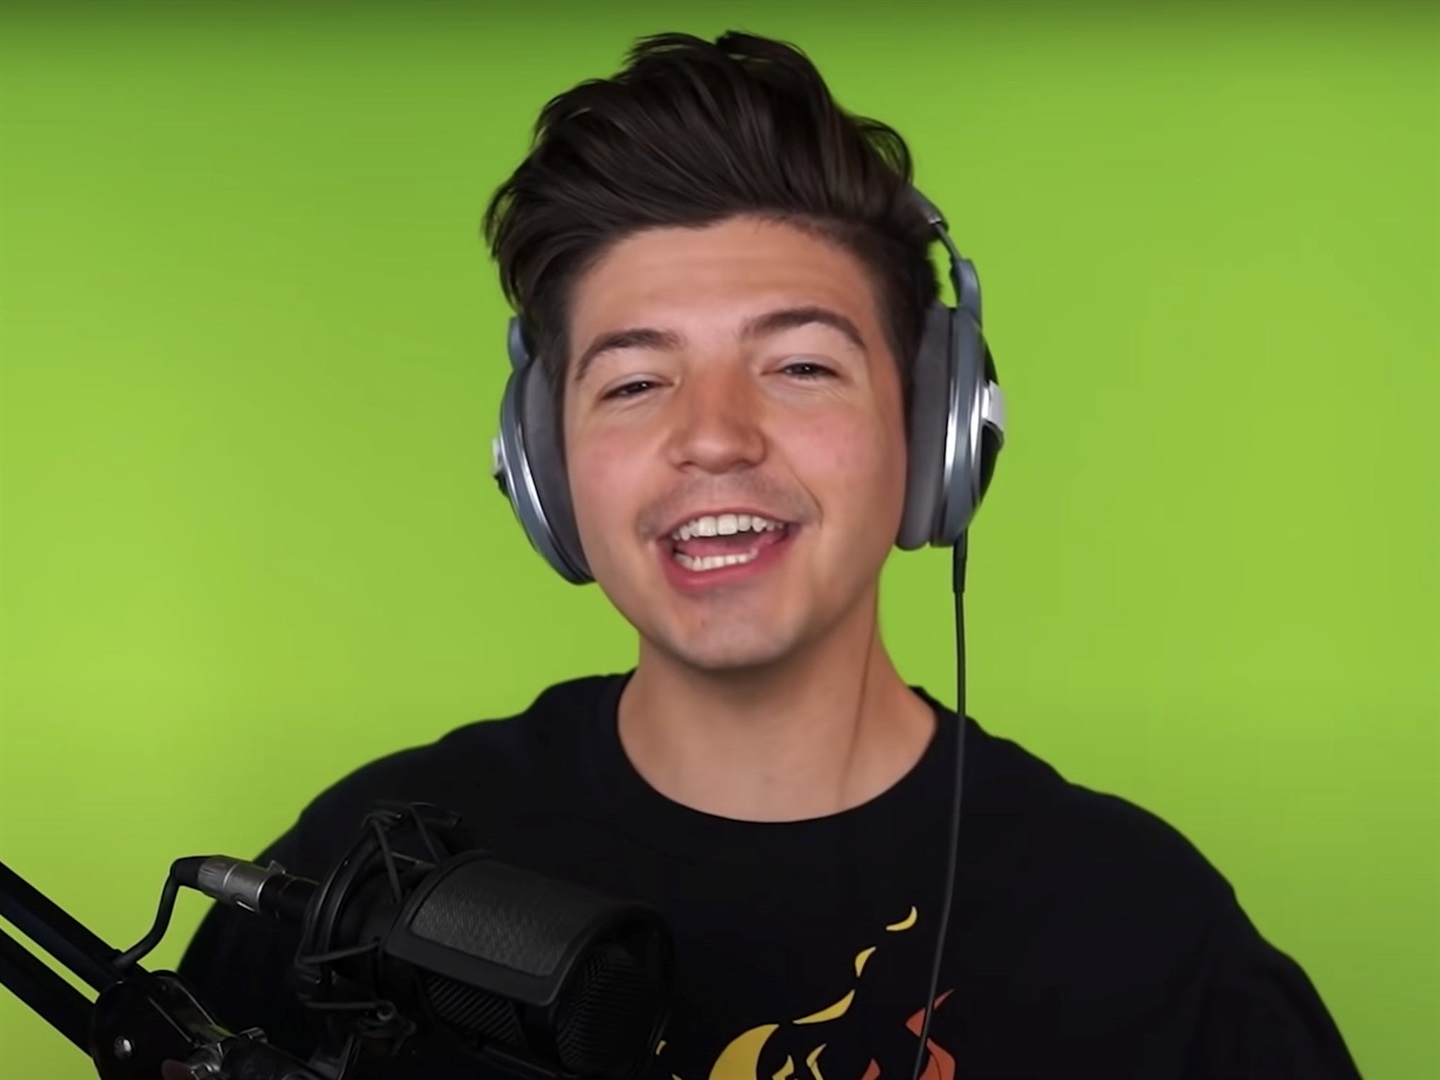 These were the highest paid YouTubers of 2020, according to Forbes